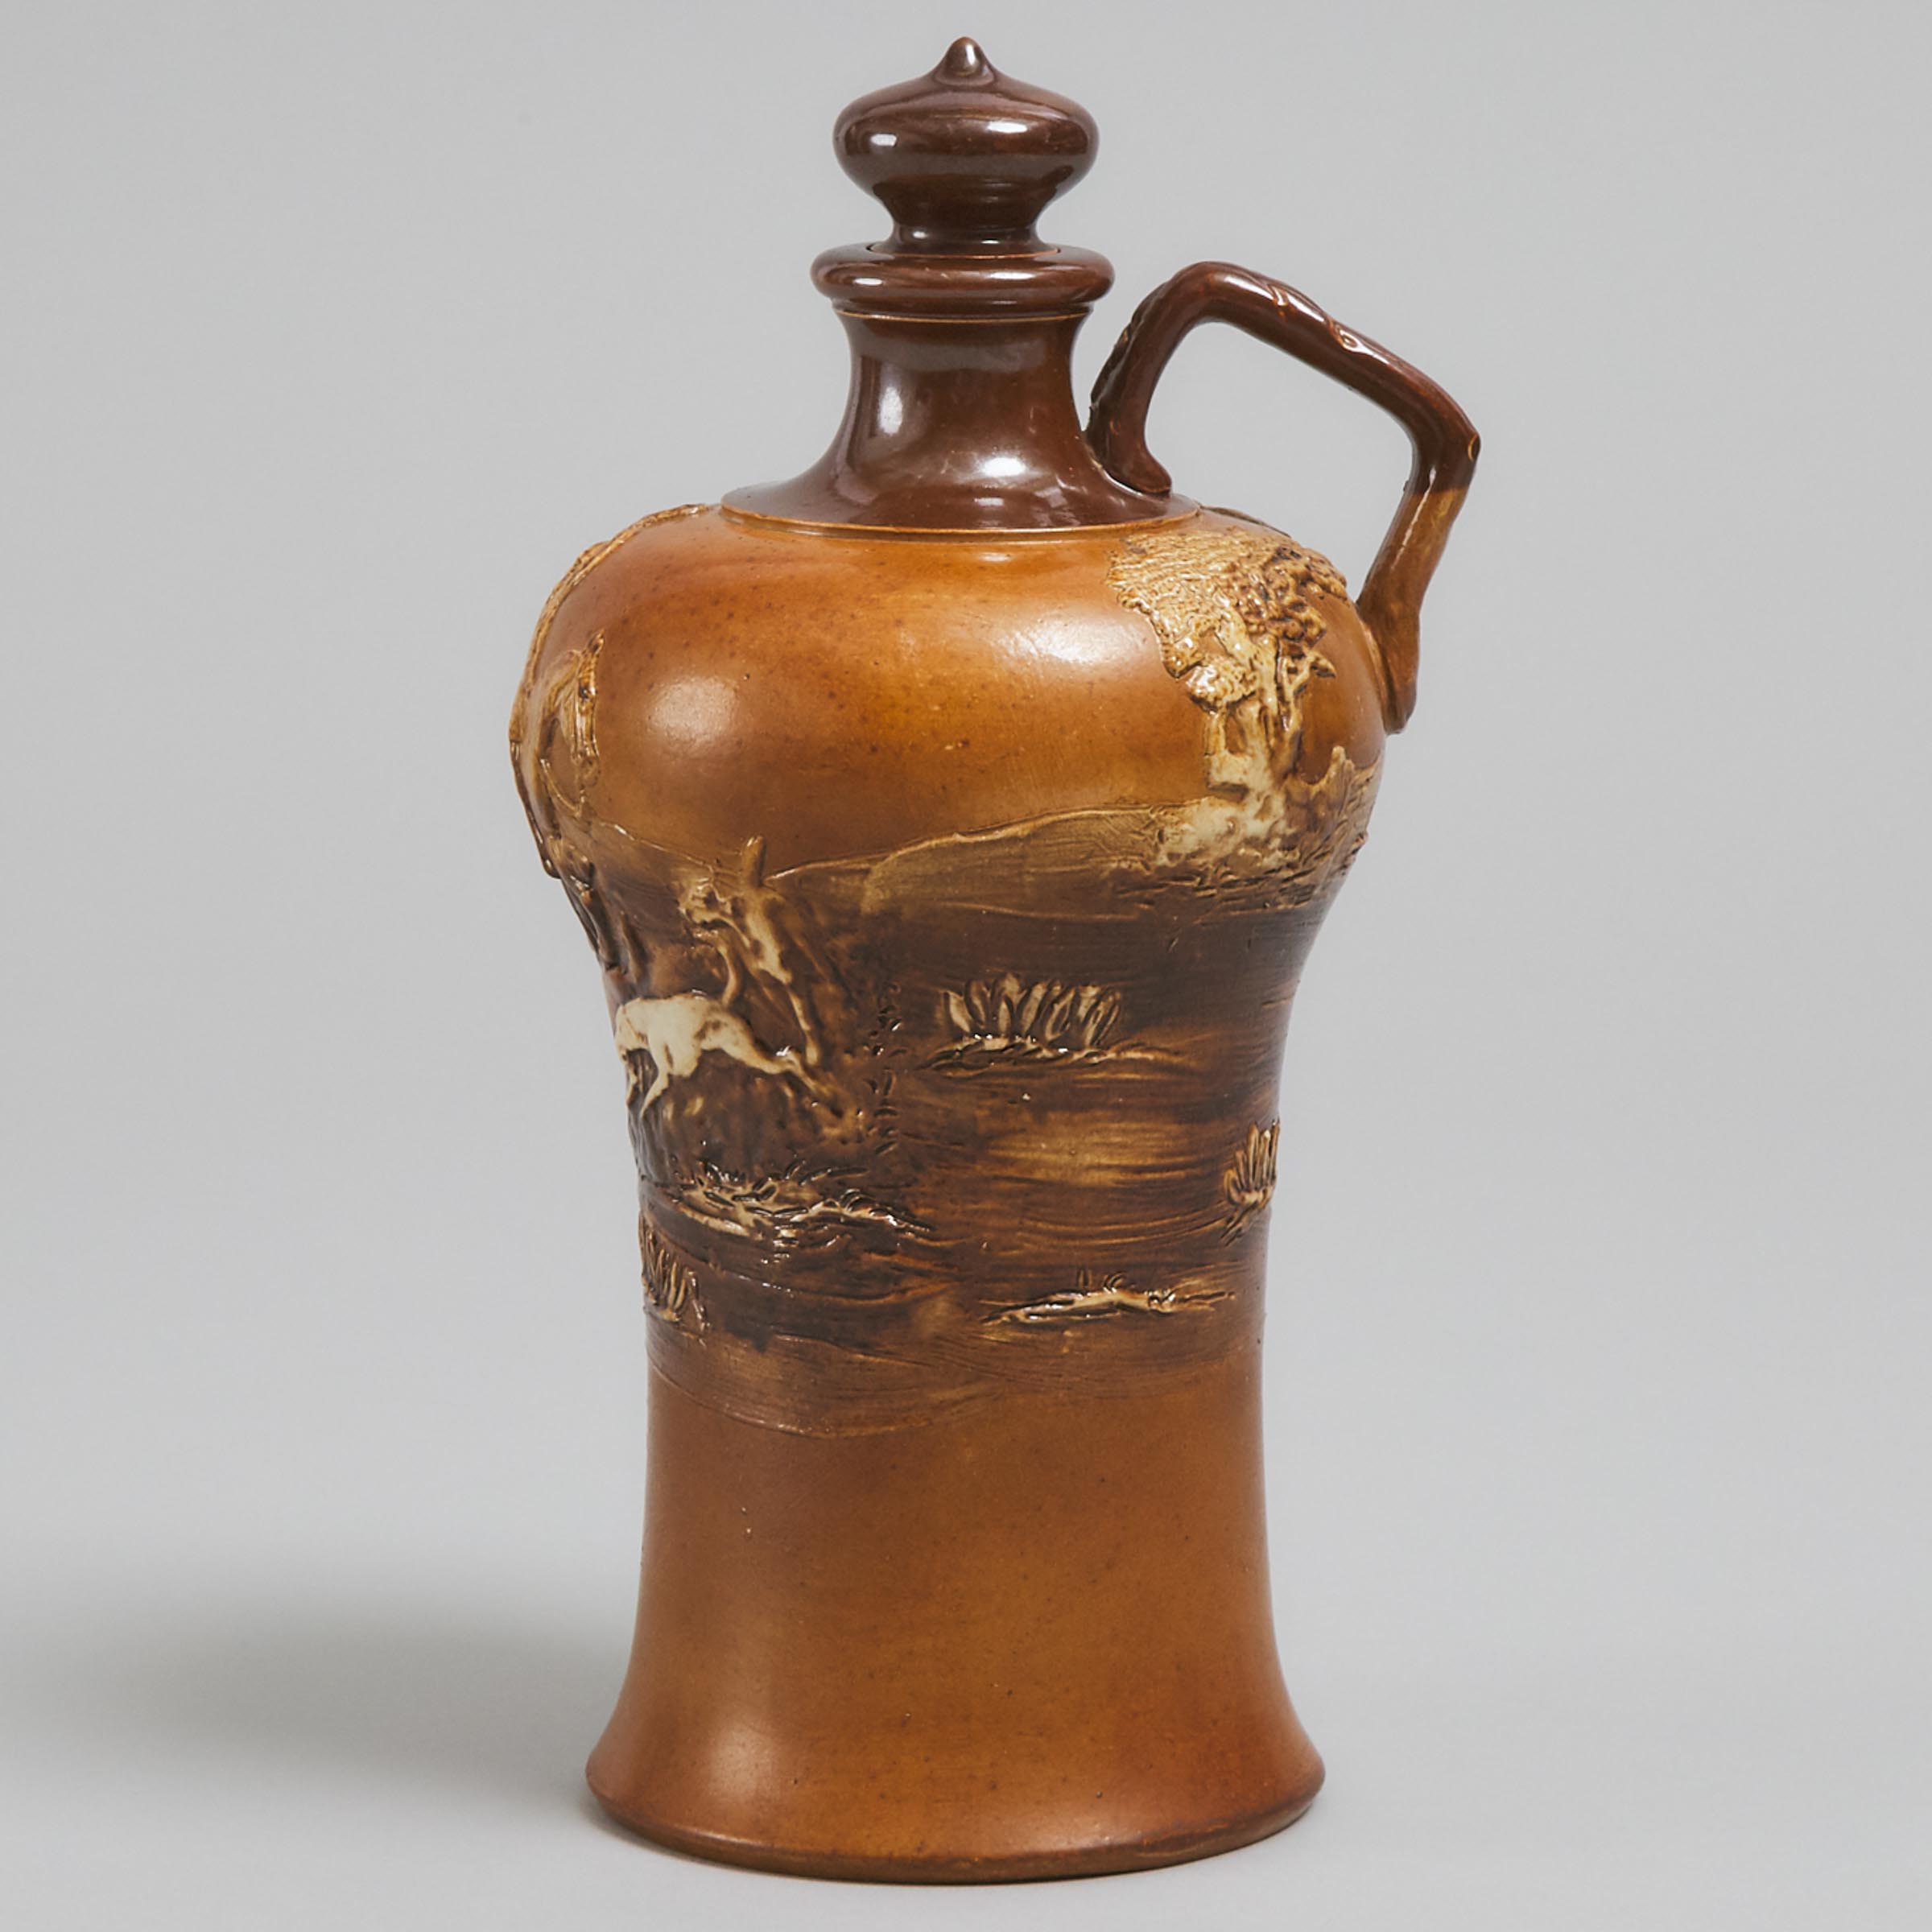 Royal Doulton Stoneware Jug with Stopper, early 20th century